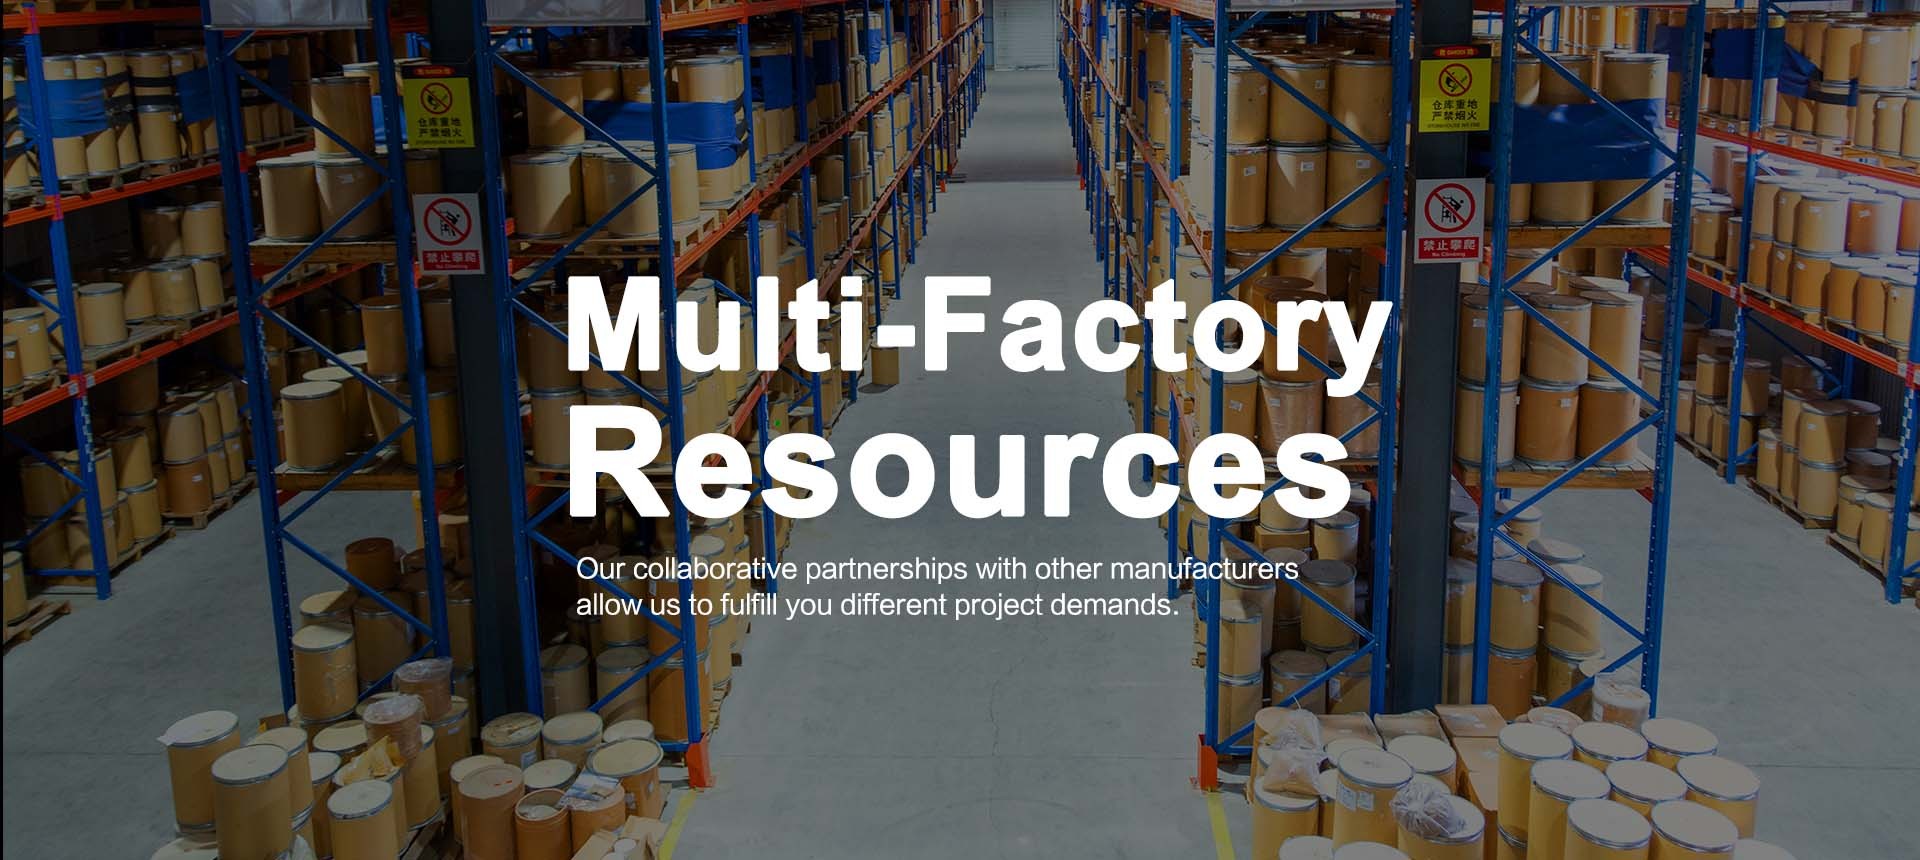 Muti-Factory Resources